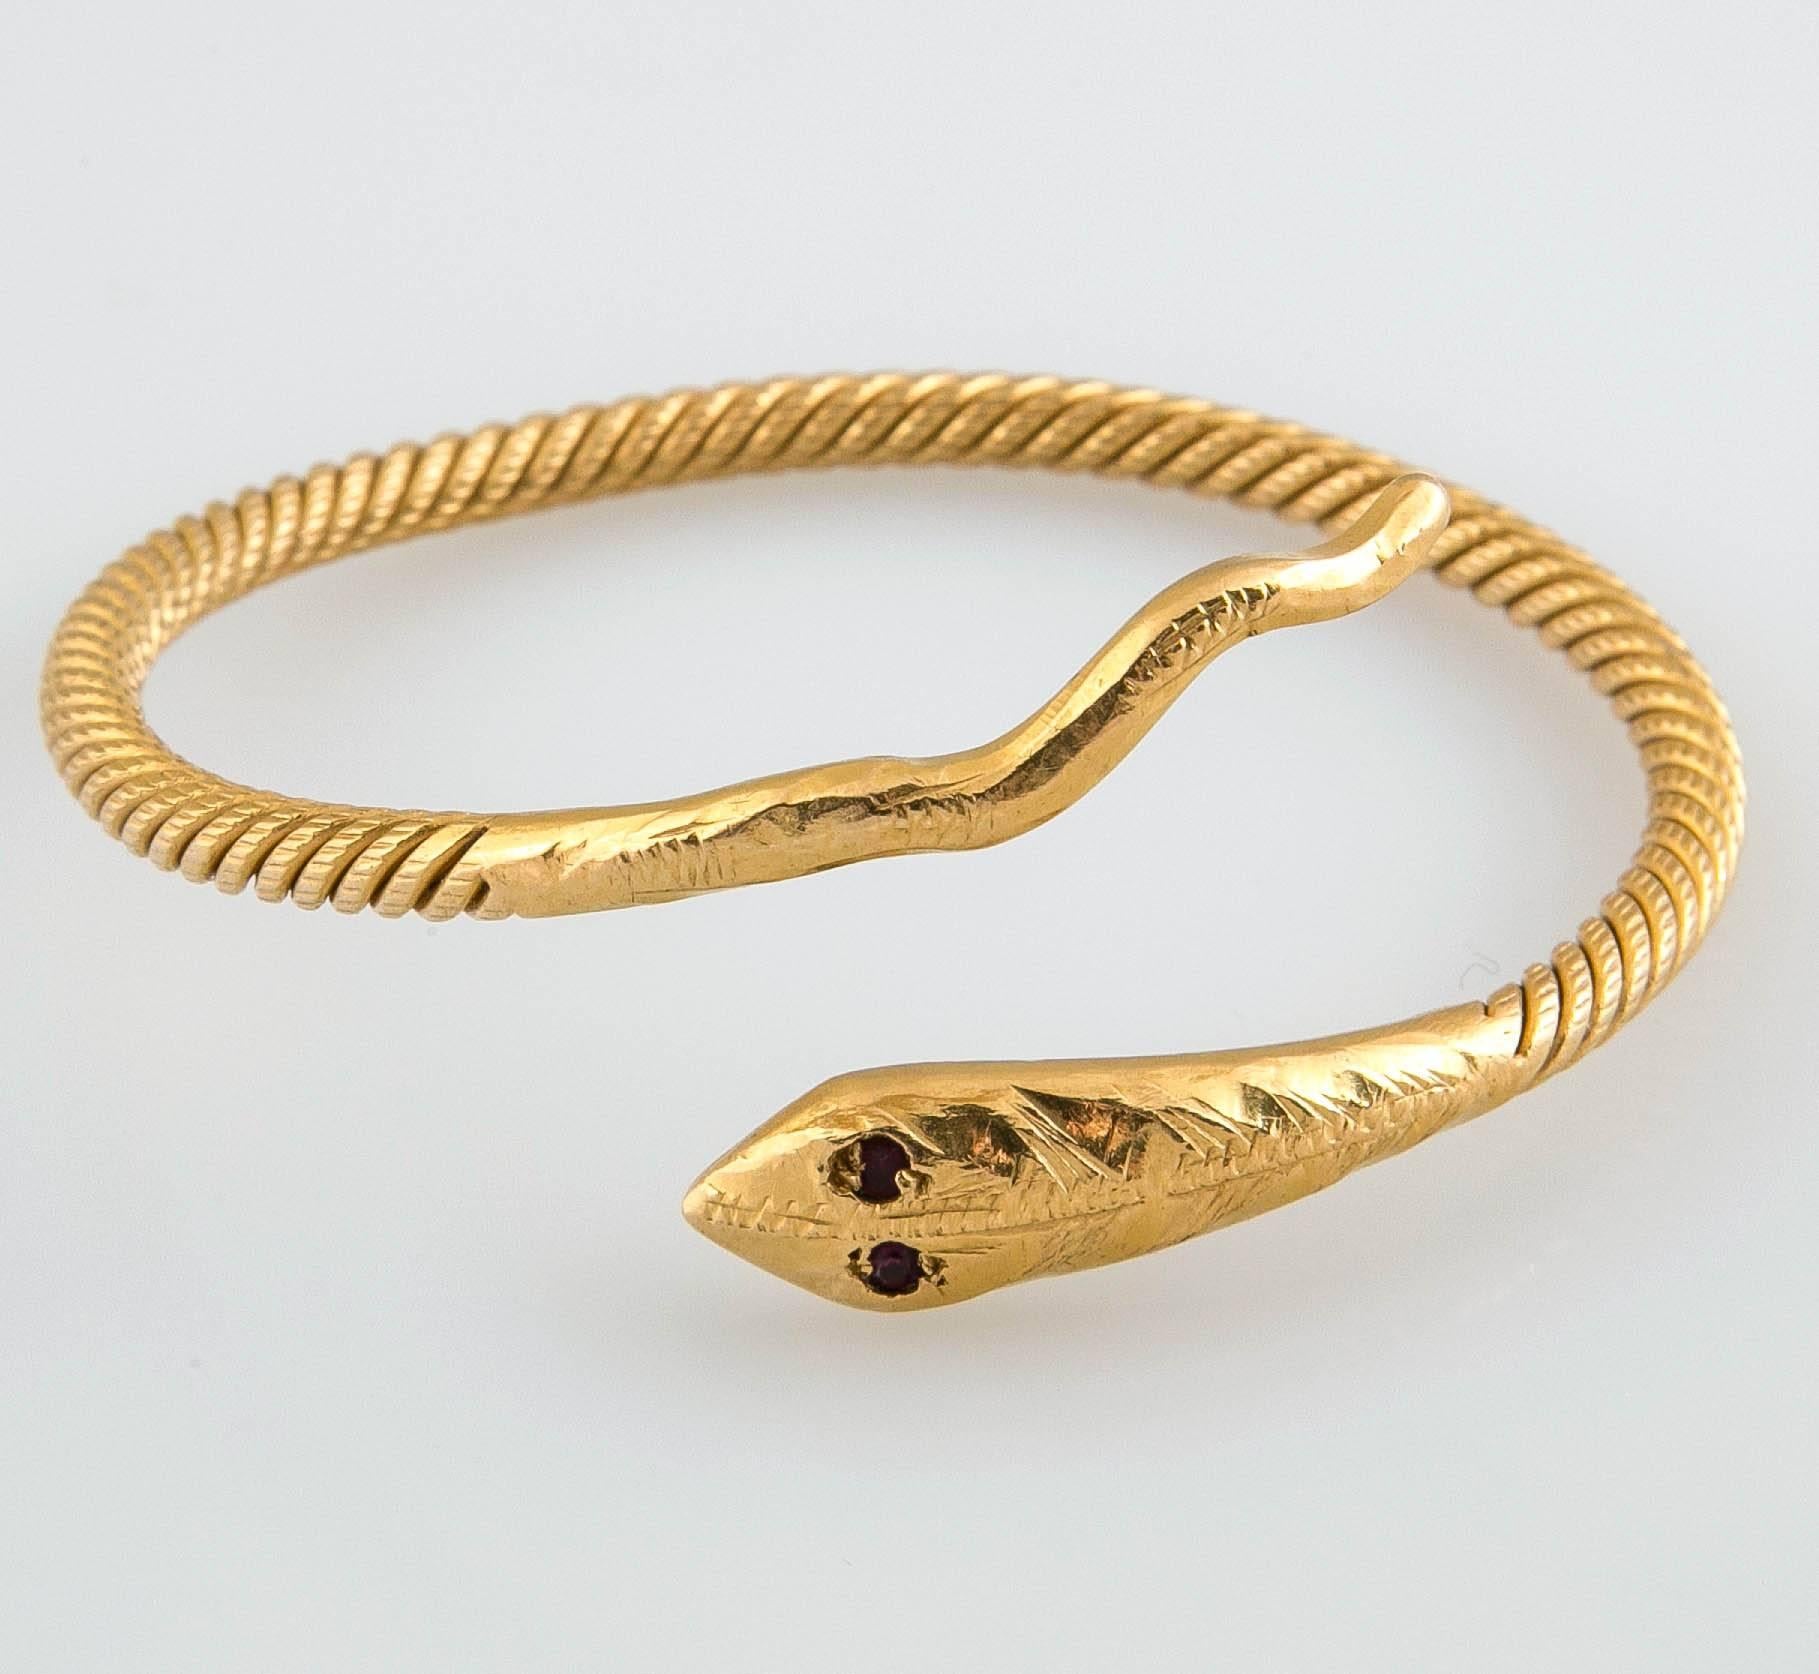 A beautifully made and hall marked bracelet, tests between 18-20 kt in gold.

Hallmarked Europe 

28.3 dwt
44 grams